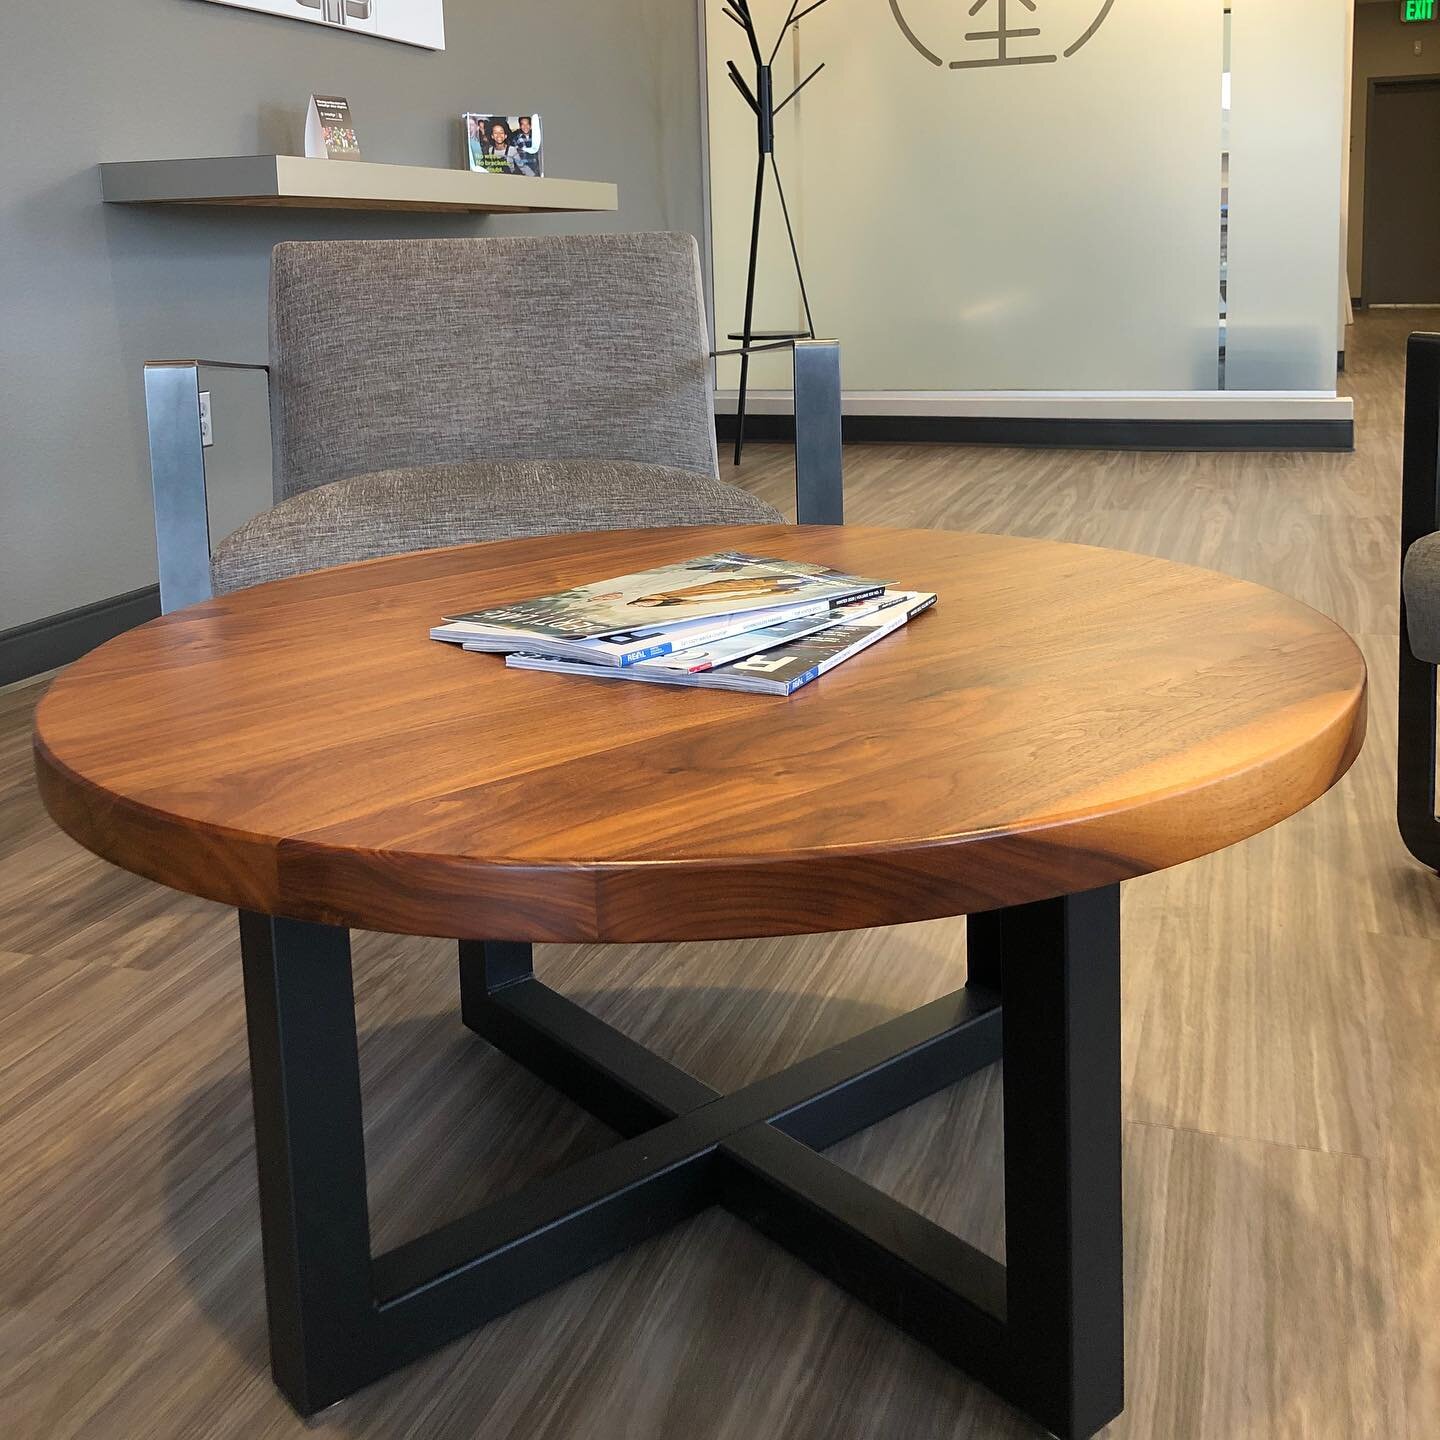 This #ThrowBackThursday goes to the three walnut tables that we built back in 2019. We still love this combo of black metal and walnut! It bring so much warmth to a space!
&bull;
#tbt #metalandwood #metalandwoodfurniture #customtable #bespokefurnitur